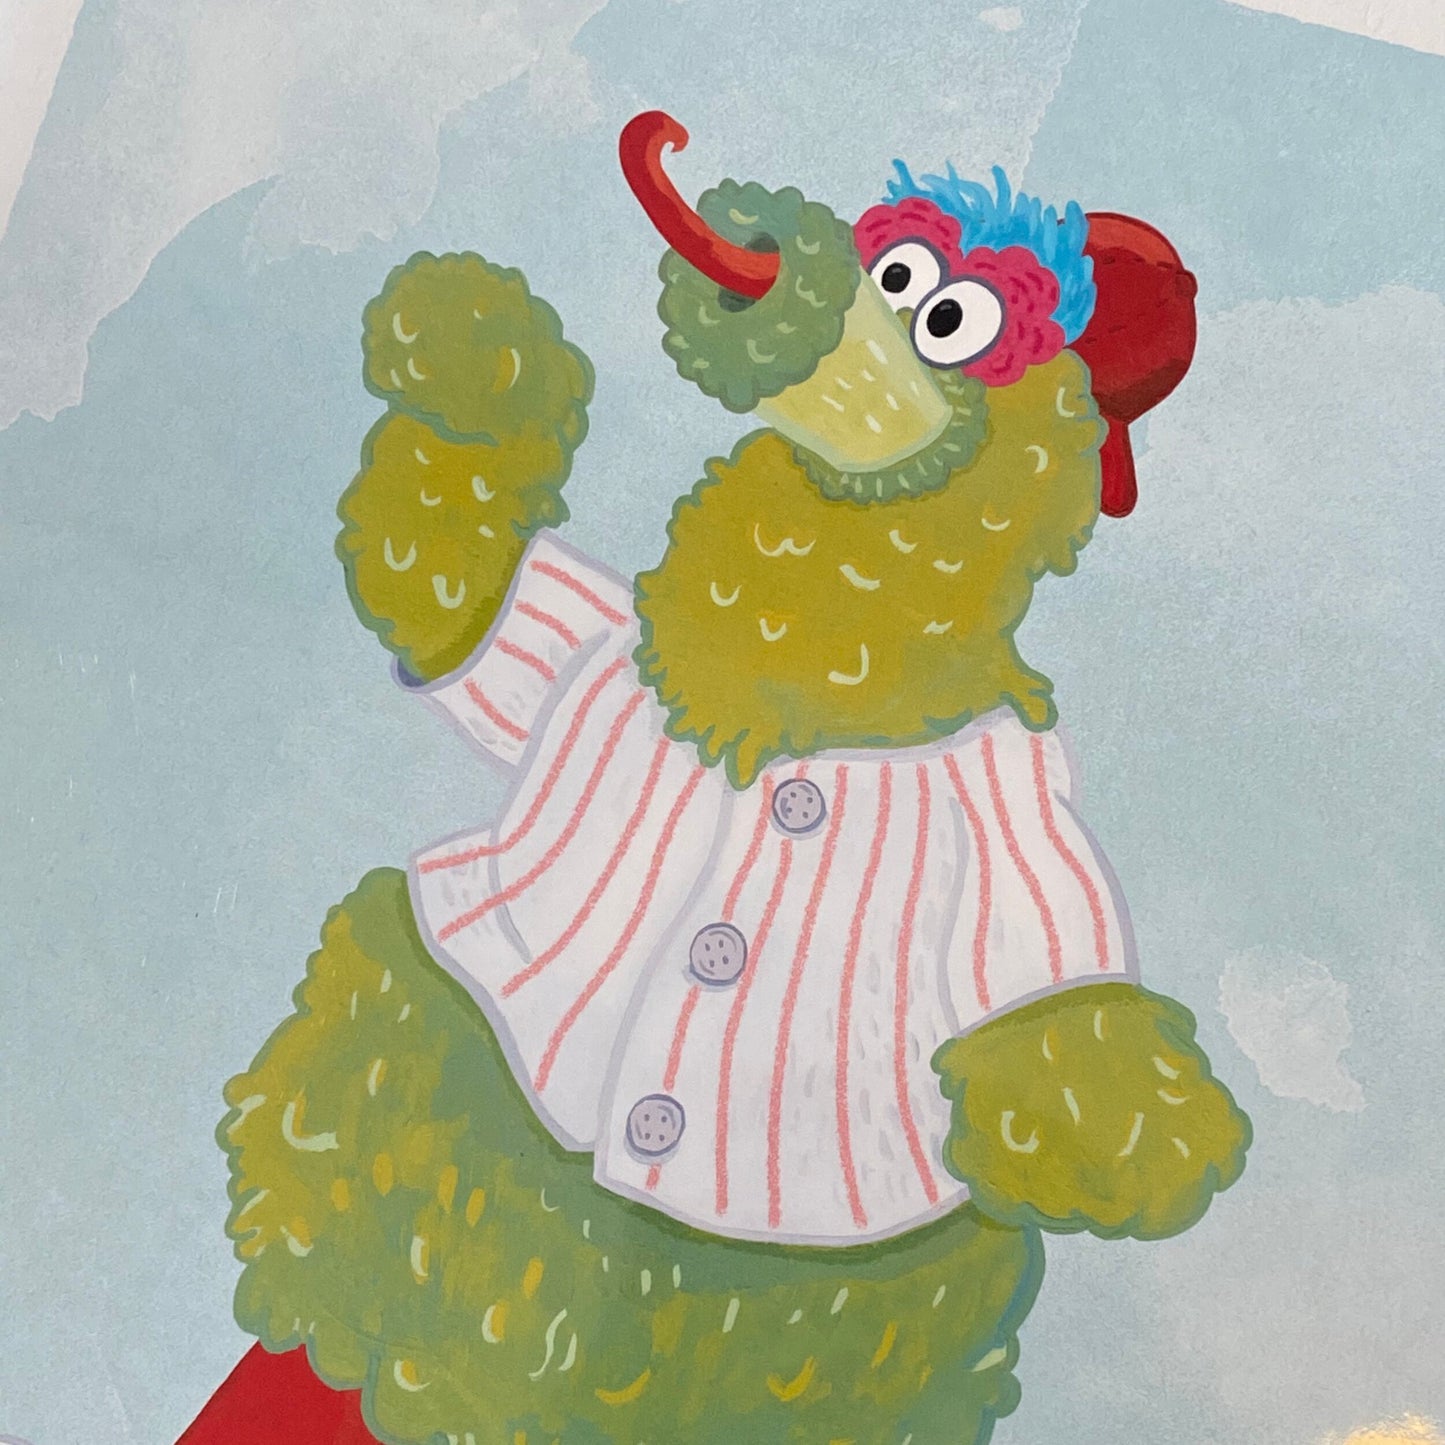 Illustration of a cheerful green muppet resembling Philly Mascot Prints, wearing a red and white striped baseball uniform and a red hat, waving enthusiastically by Jamie Bendas.